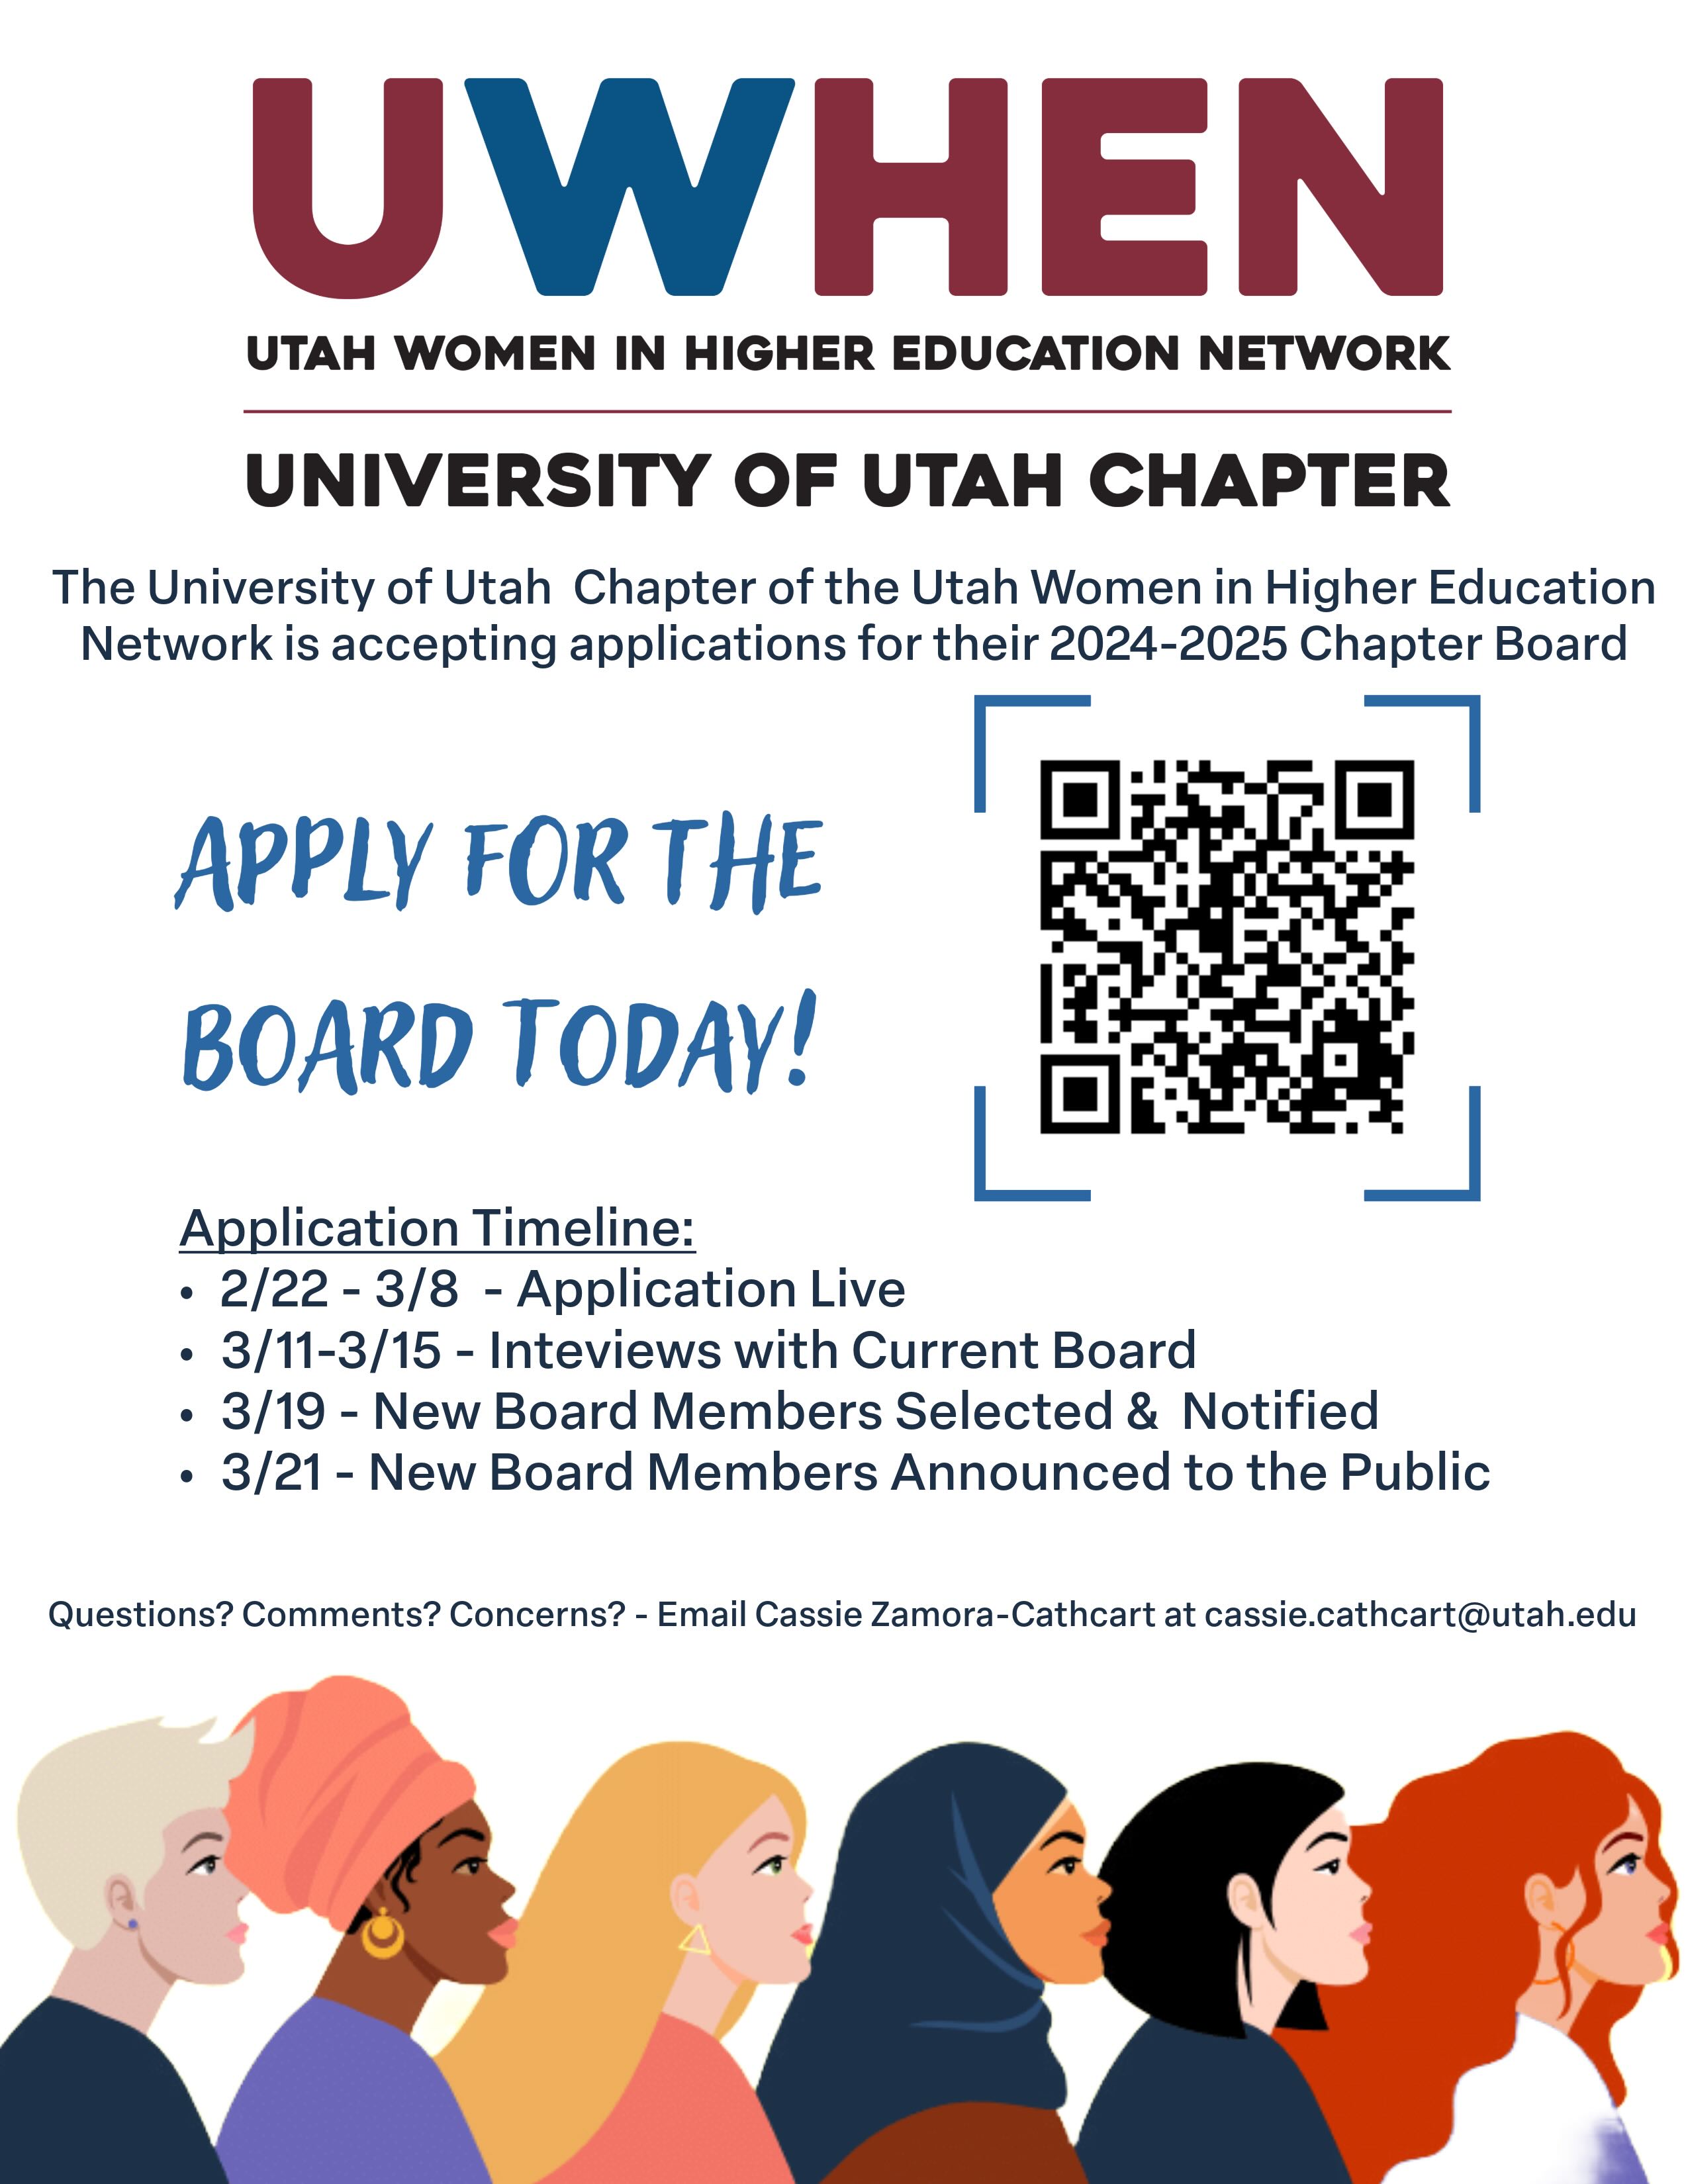 Flyer with the details of how where to apply for the board. All information that is listed in the blog content.